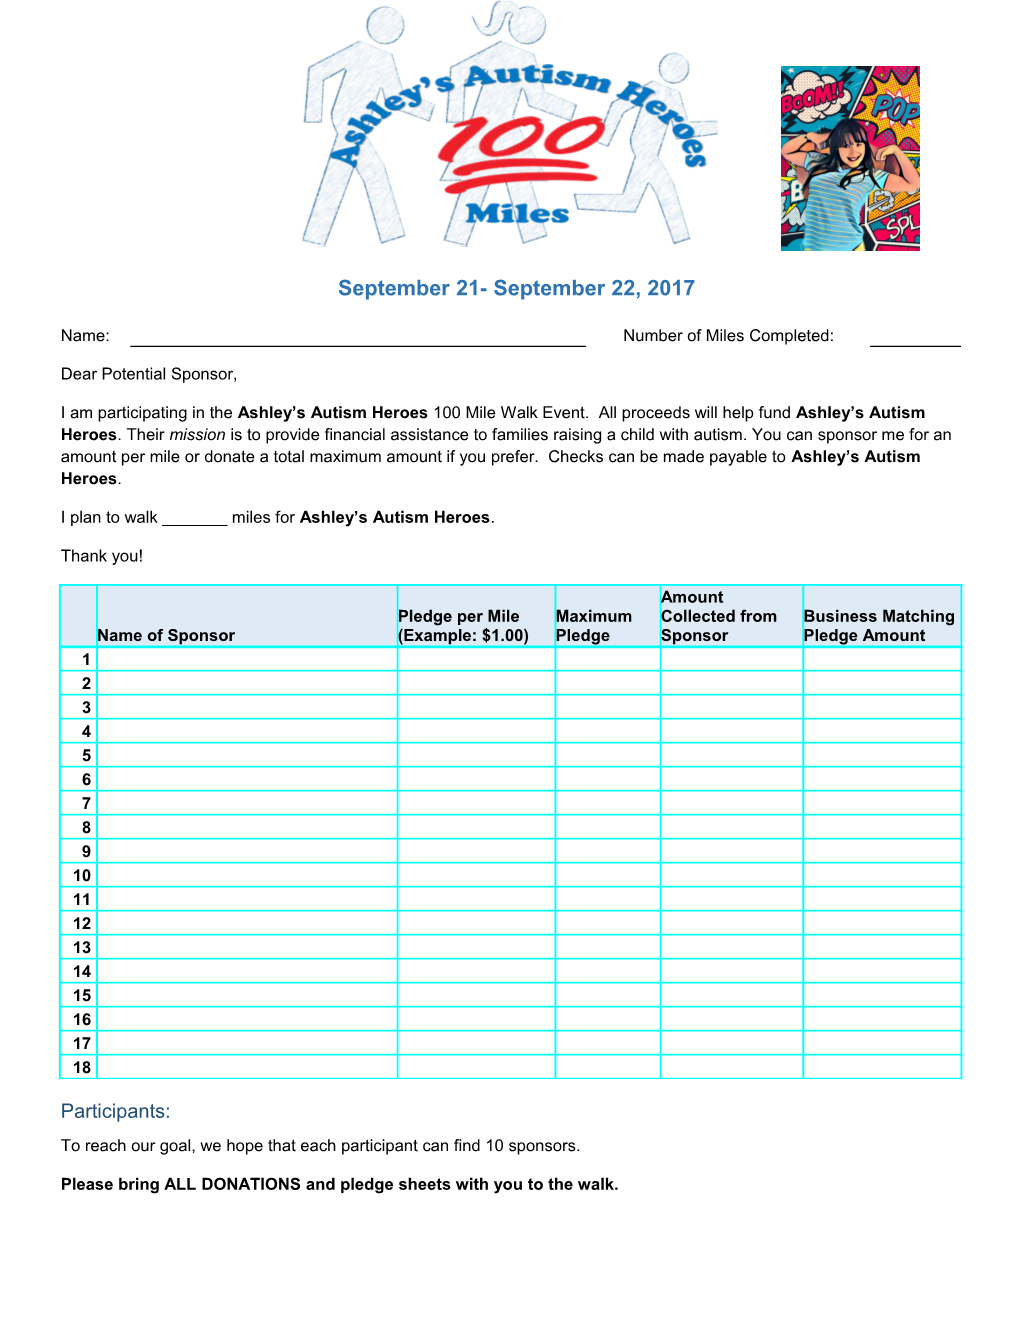 I Plan to Walk ______Miles for Ashley S Autism Heroes